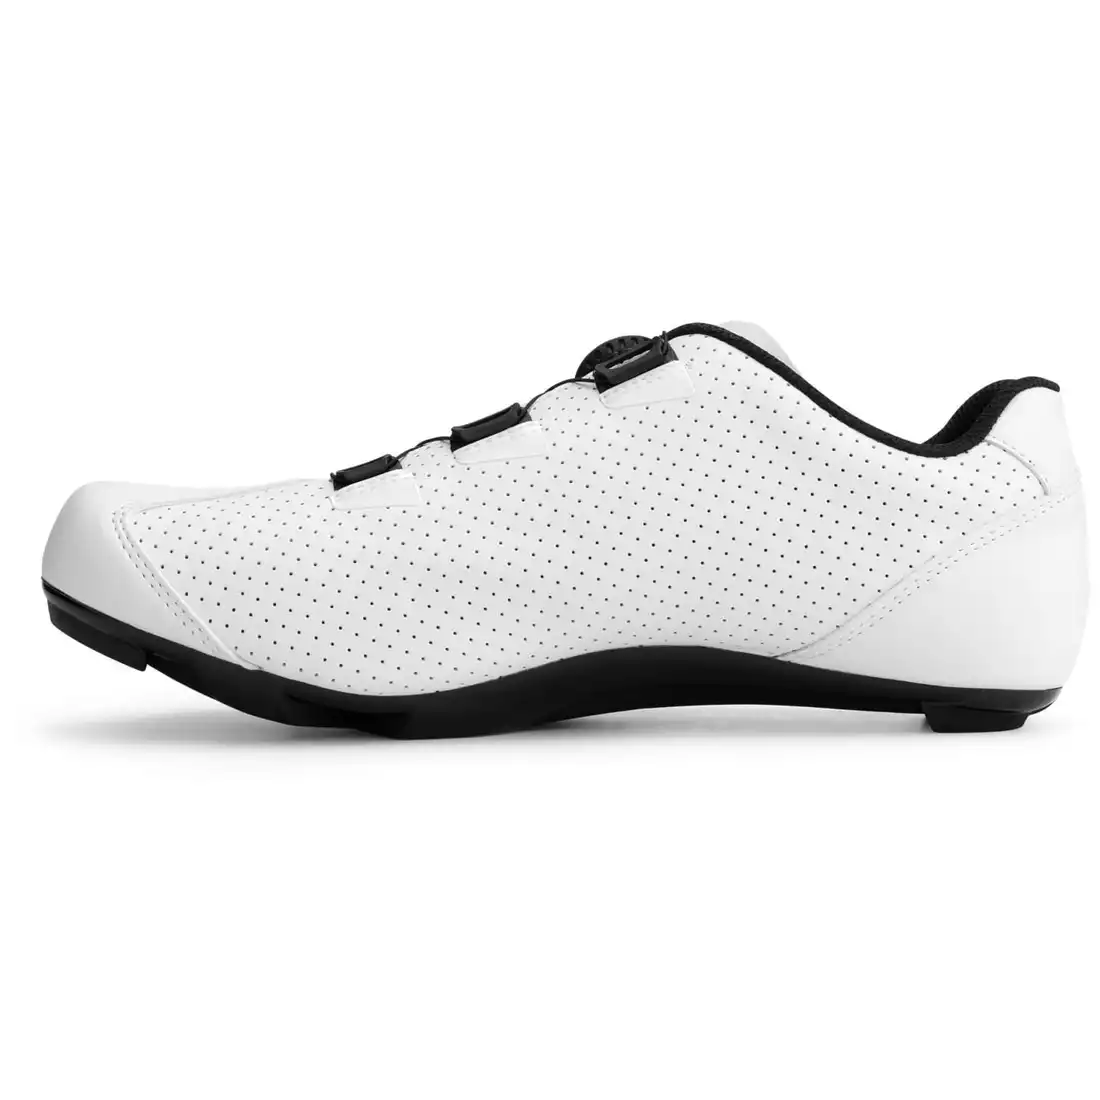 Rogelli R400 RACE men's cycling shoes - road, white